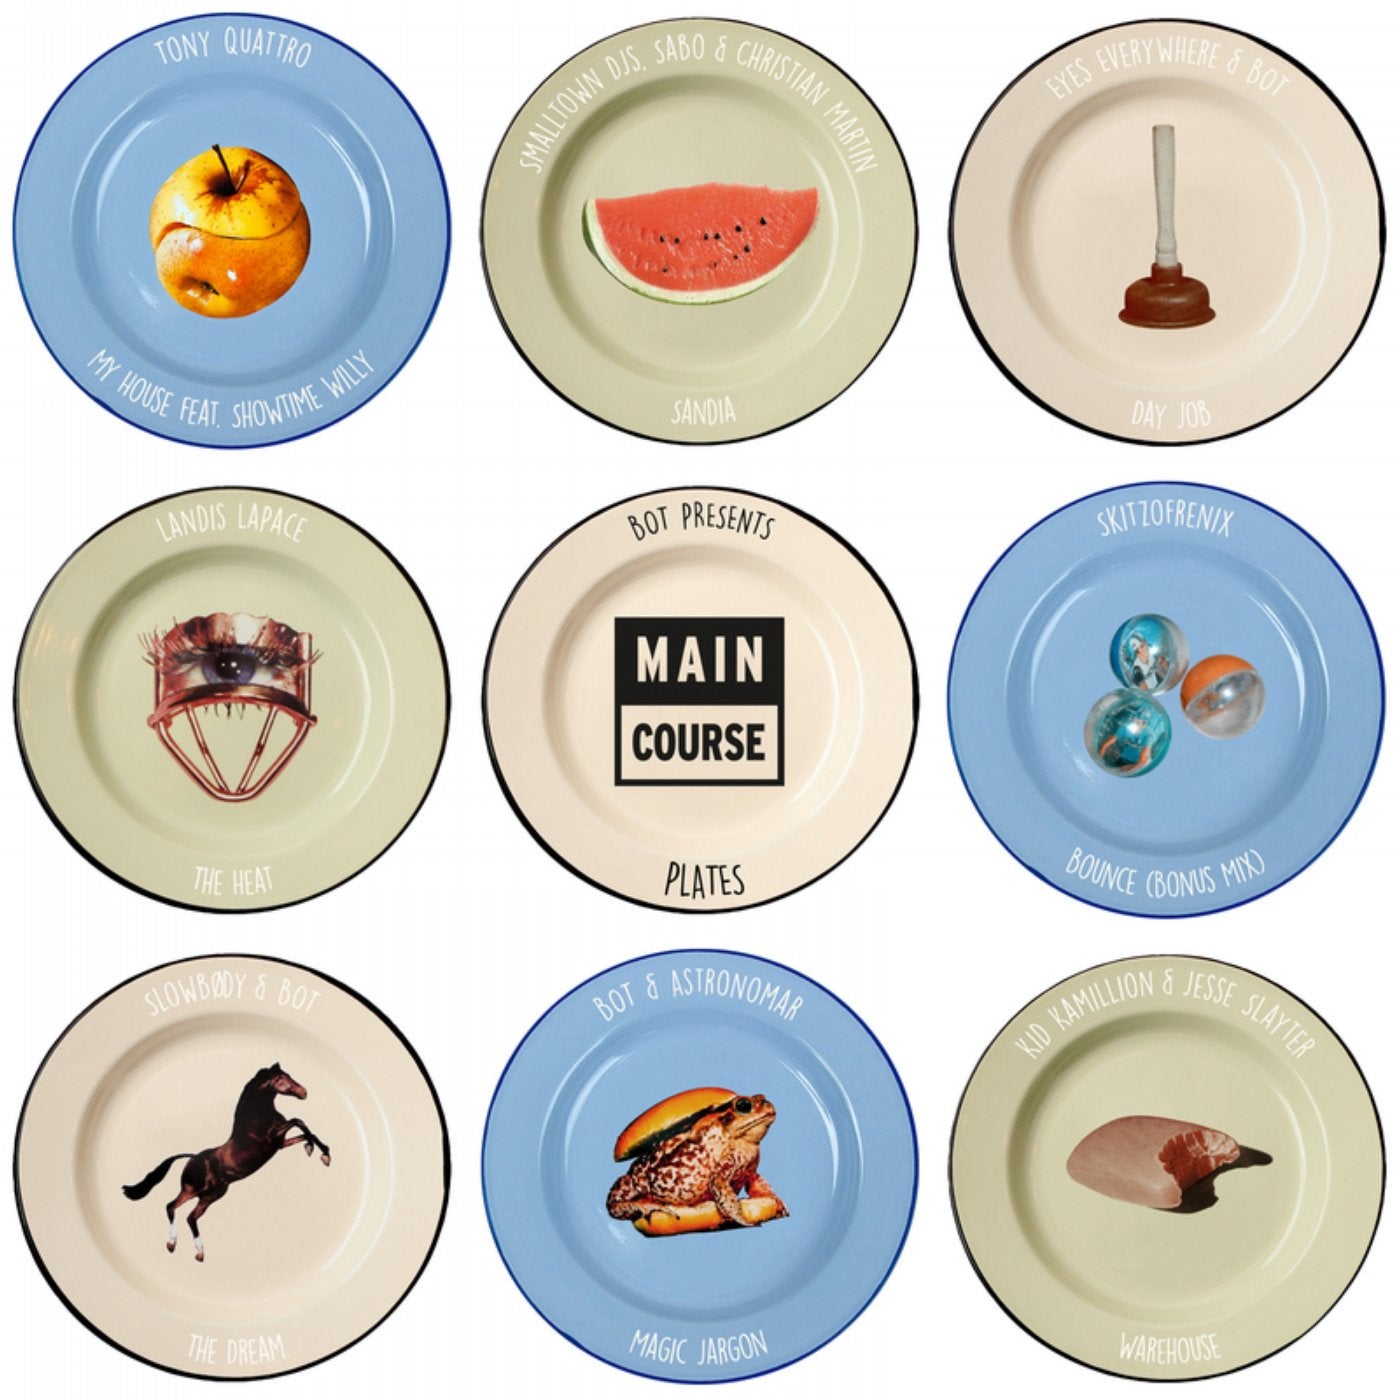 Plates (presented by BOT)